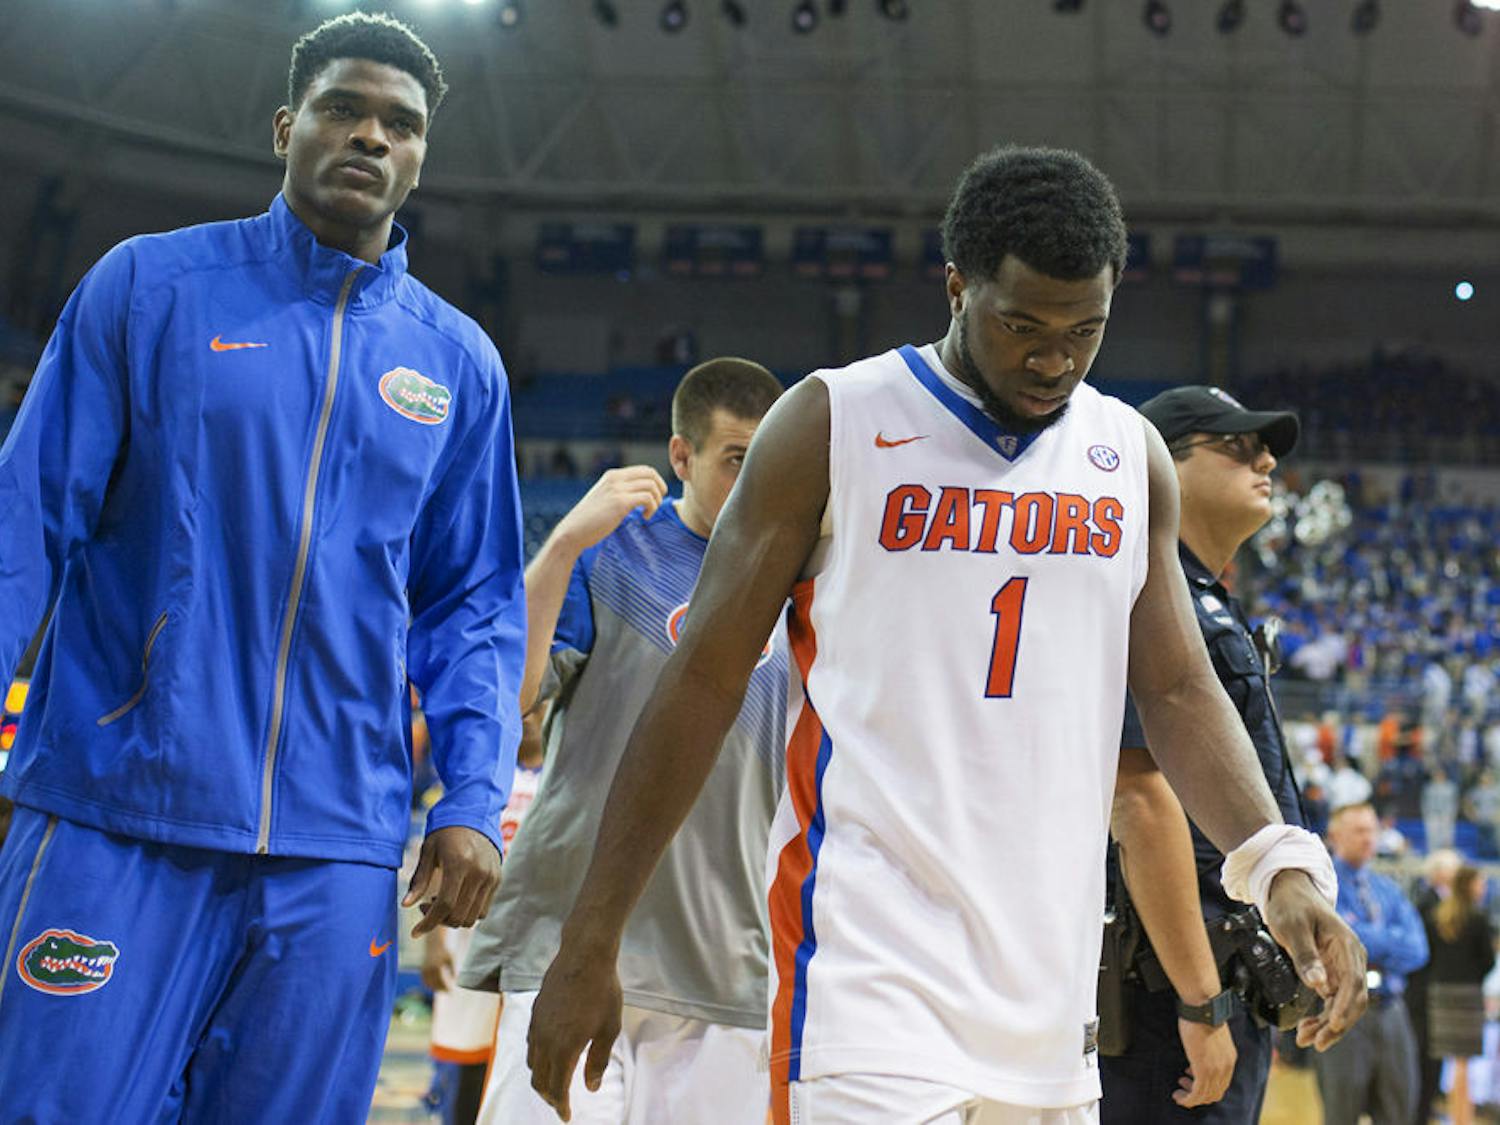 Eli Carter walks off the court following Florida's 69-67 loss to Miami on Nov. 17 in the O'Connell Center.